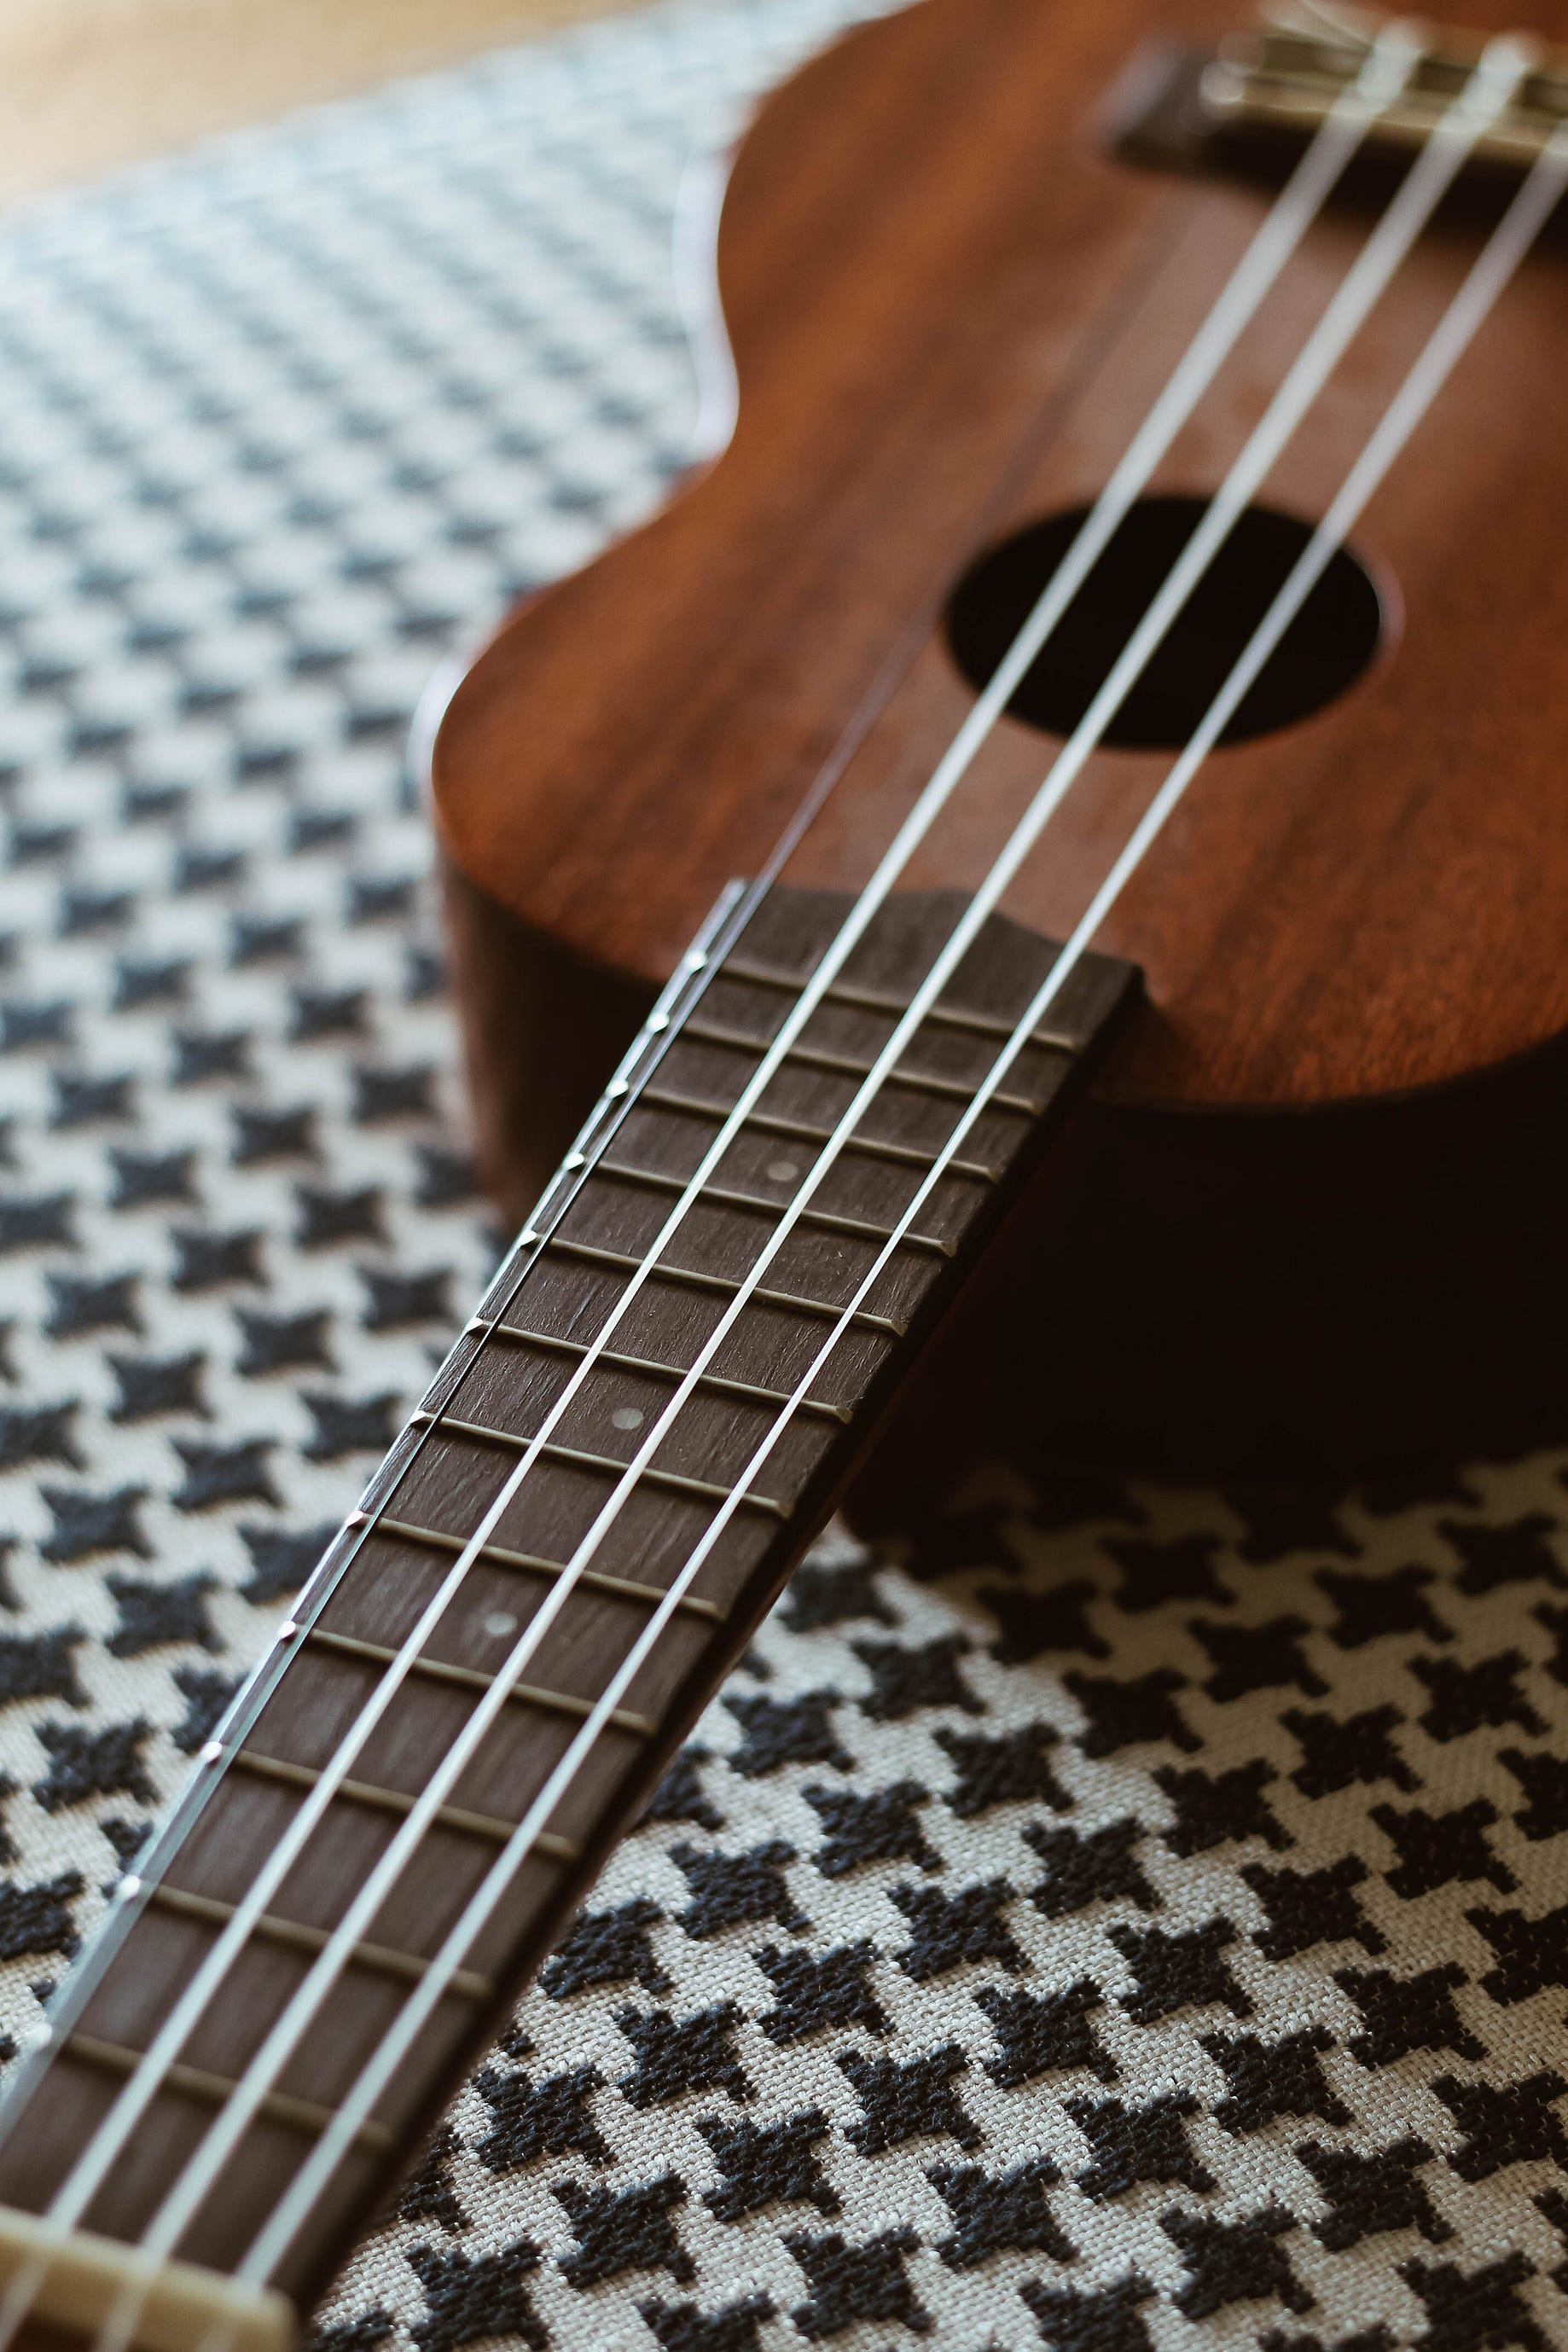 Seven Reasons Why You Should Learn to Play the Ukulele | by Michael | Writers' Blokke Medium